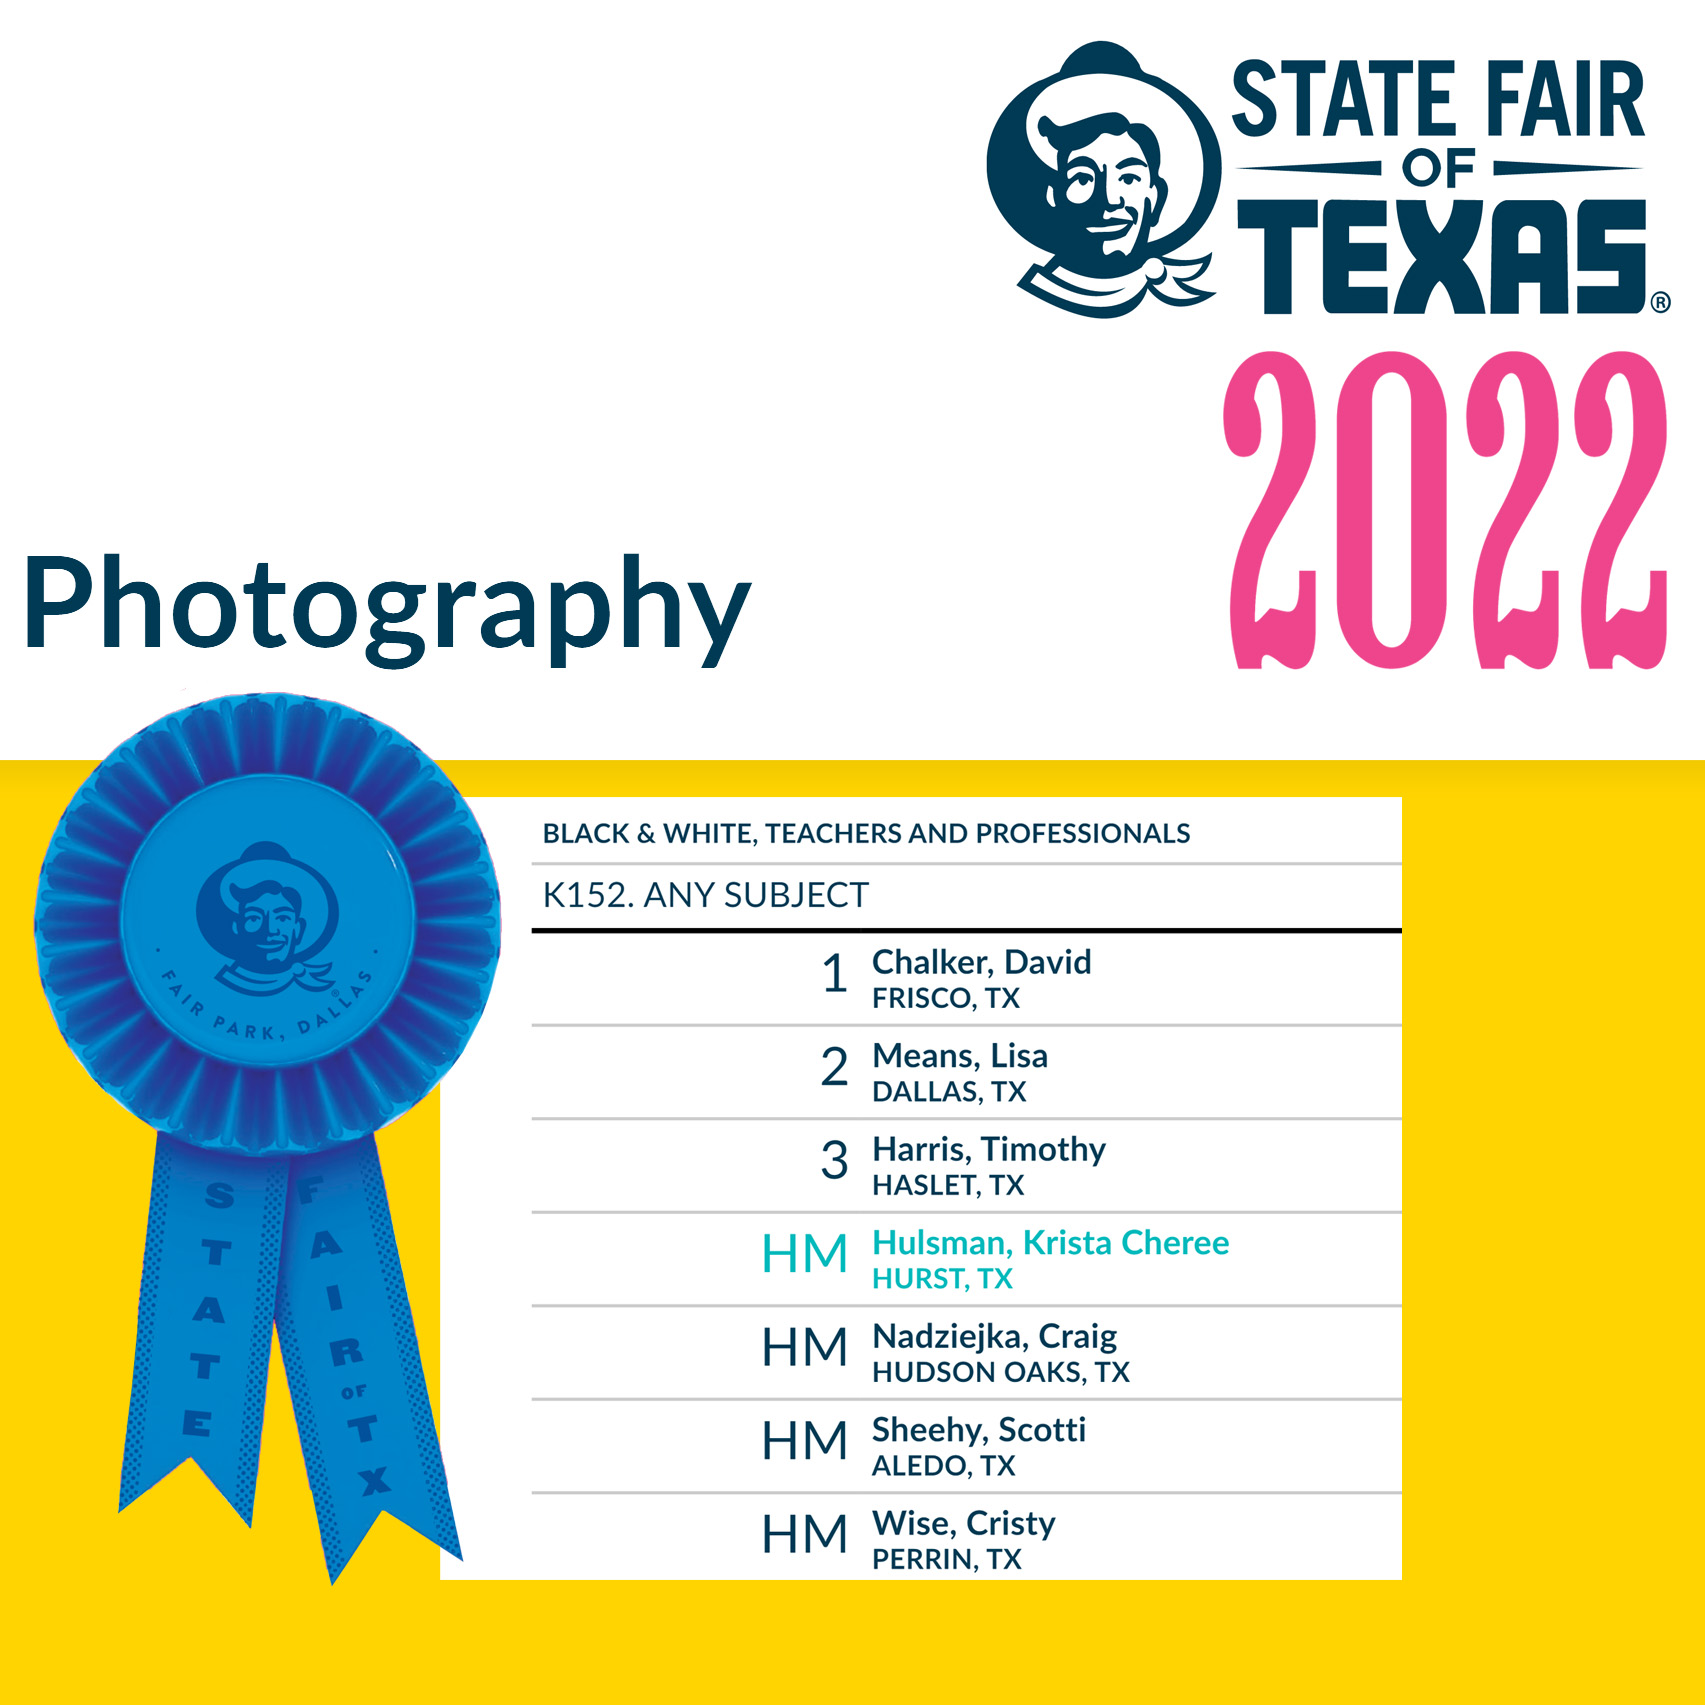 State Fair of Texas Winners 2022, Black and White